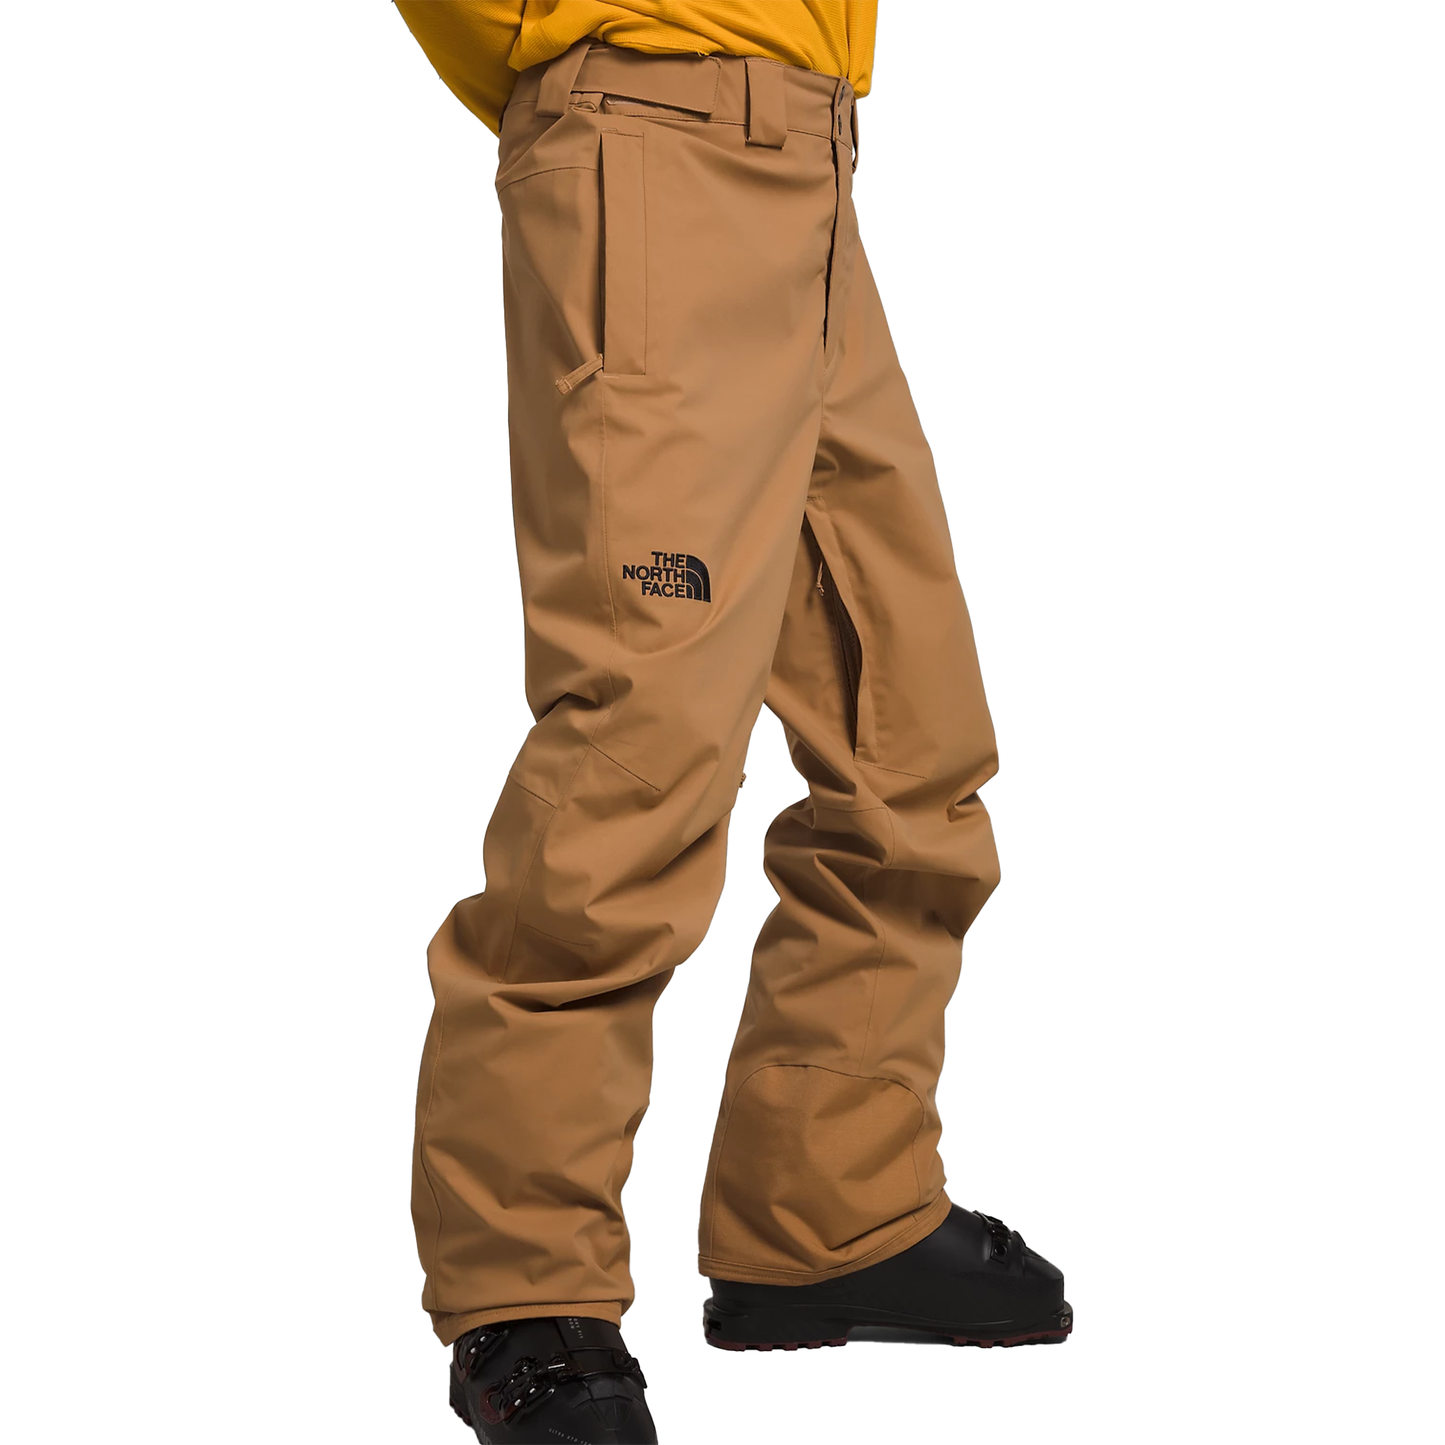 The North Face Men's Freedom Stretch Pant Snow Pants